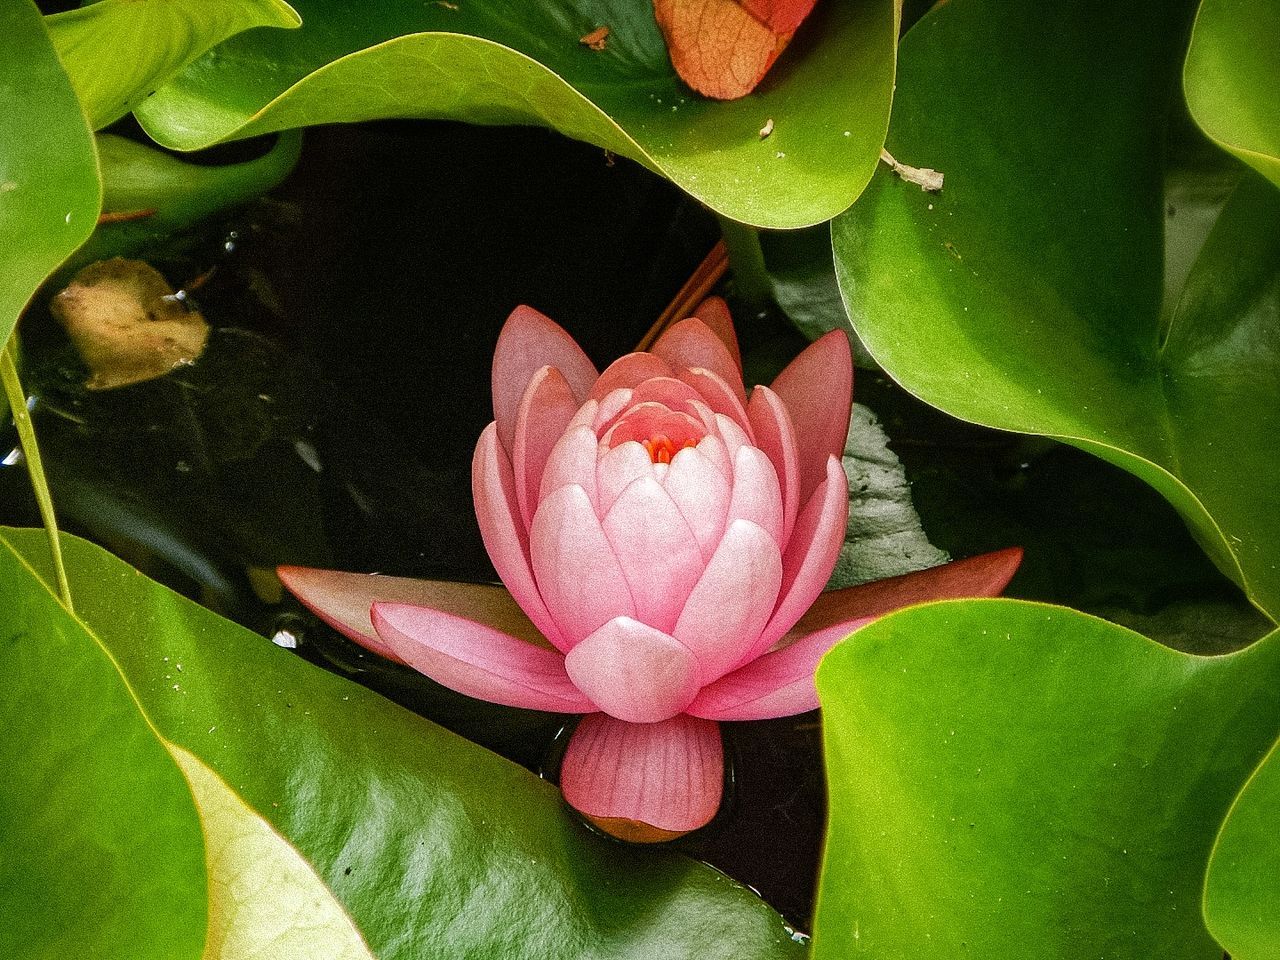 leaf, plant part, flower, plant, flowering plant, water lily, beauty in nature, freshness, aquatic plant, nature, petal, pink, green, close-up, water, flower head, pond, growth, inflorescence, lotus water lily, fragility, lily, proteales, no people, high angle view, outdoors, macro photography